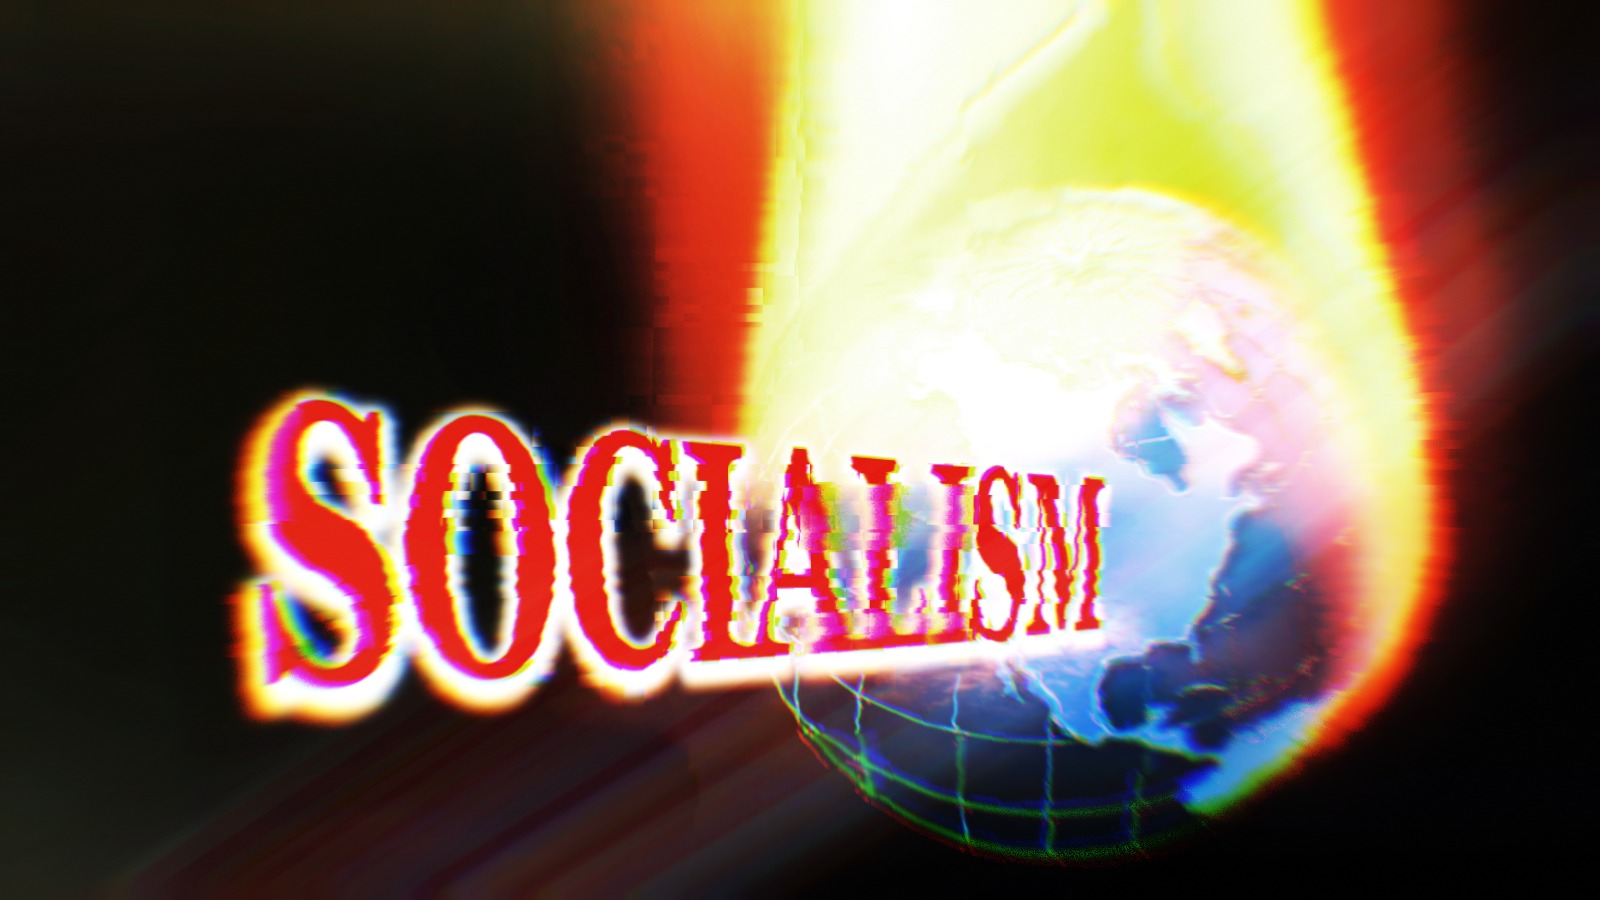 Text that says 'Socialism' over a globe.